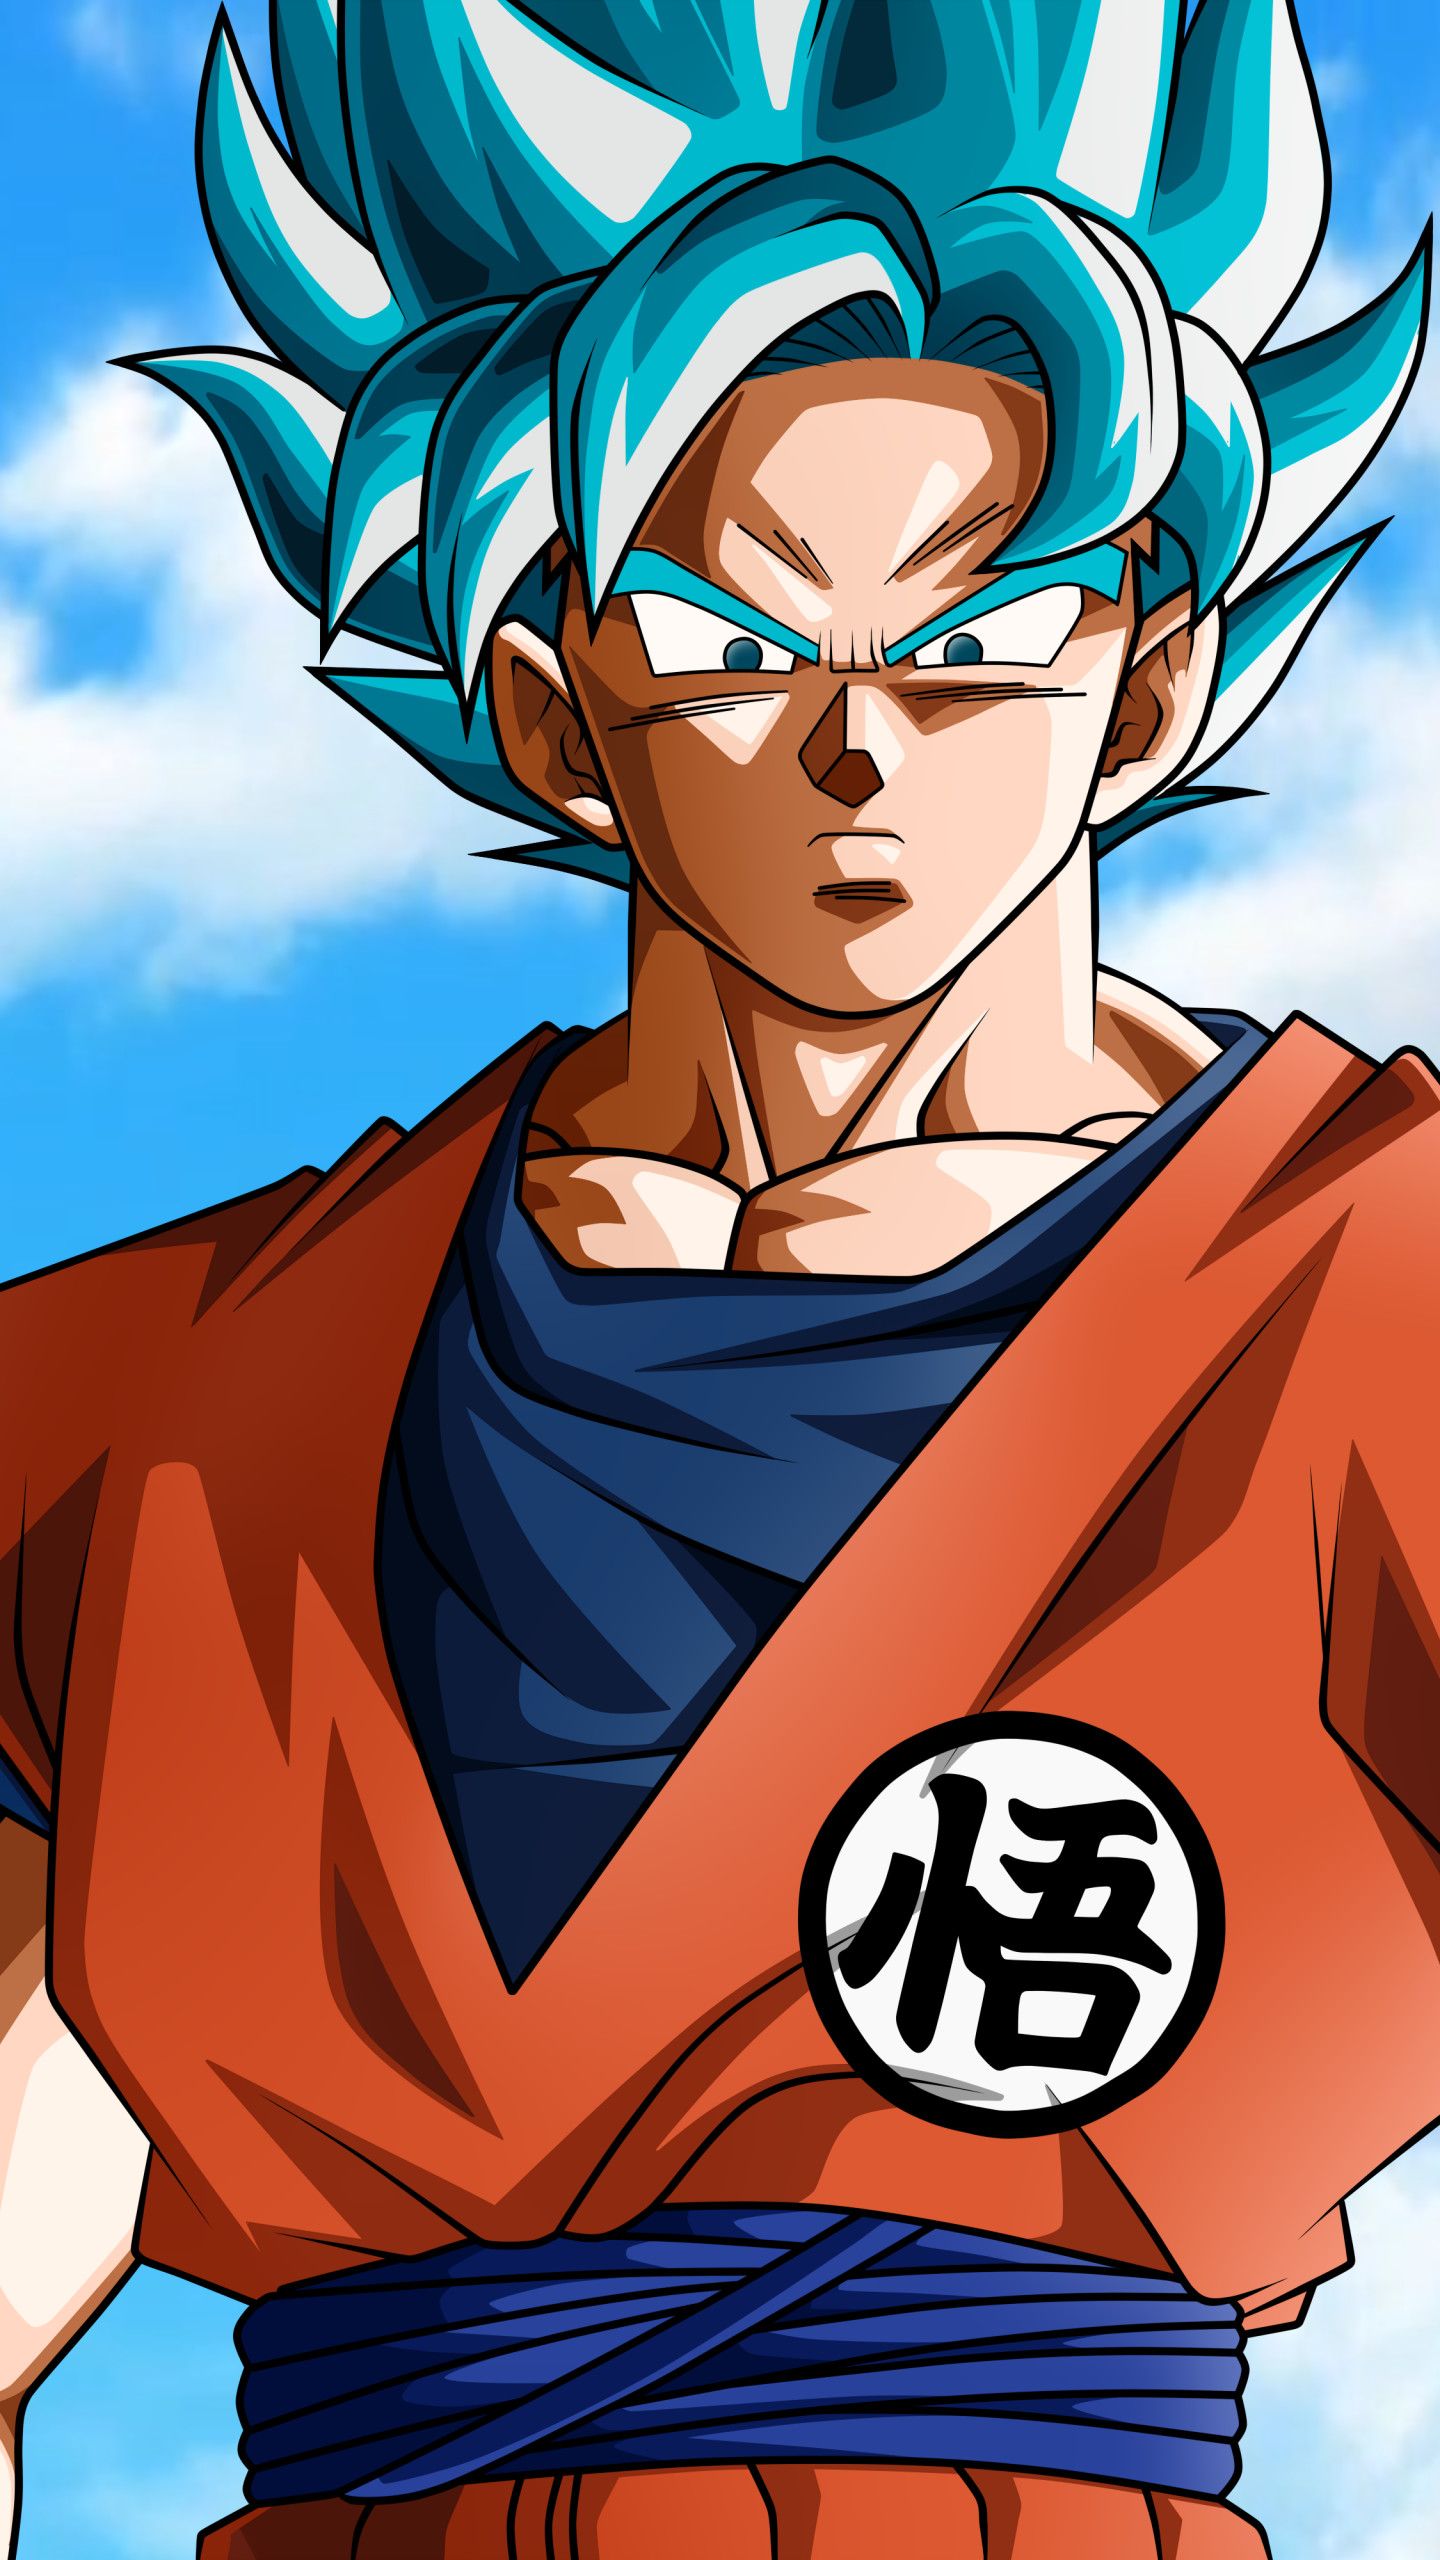 Dragon Ball Z - iPhone Parallax Wallpaper for iPhone 11, Pro Max, X, 8, 7,  6 - Free Download on 3Wallpapers